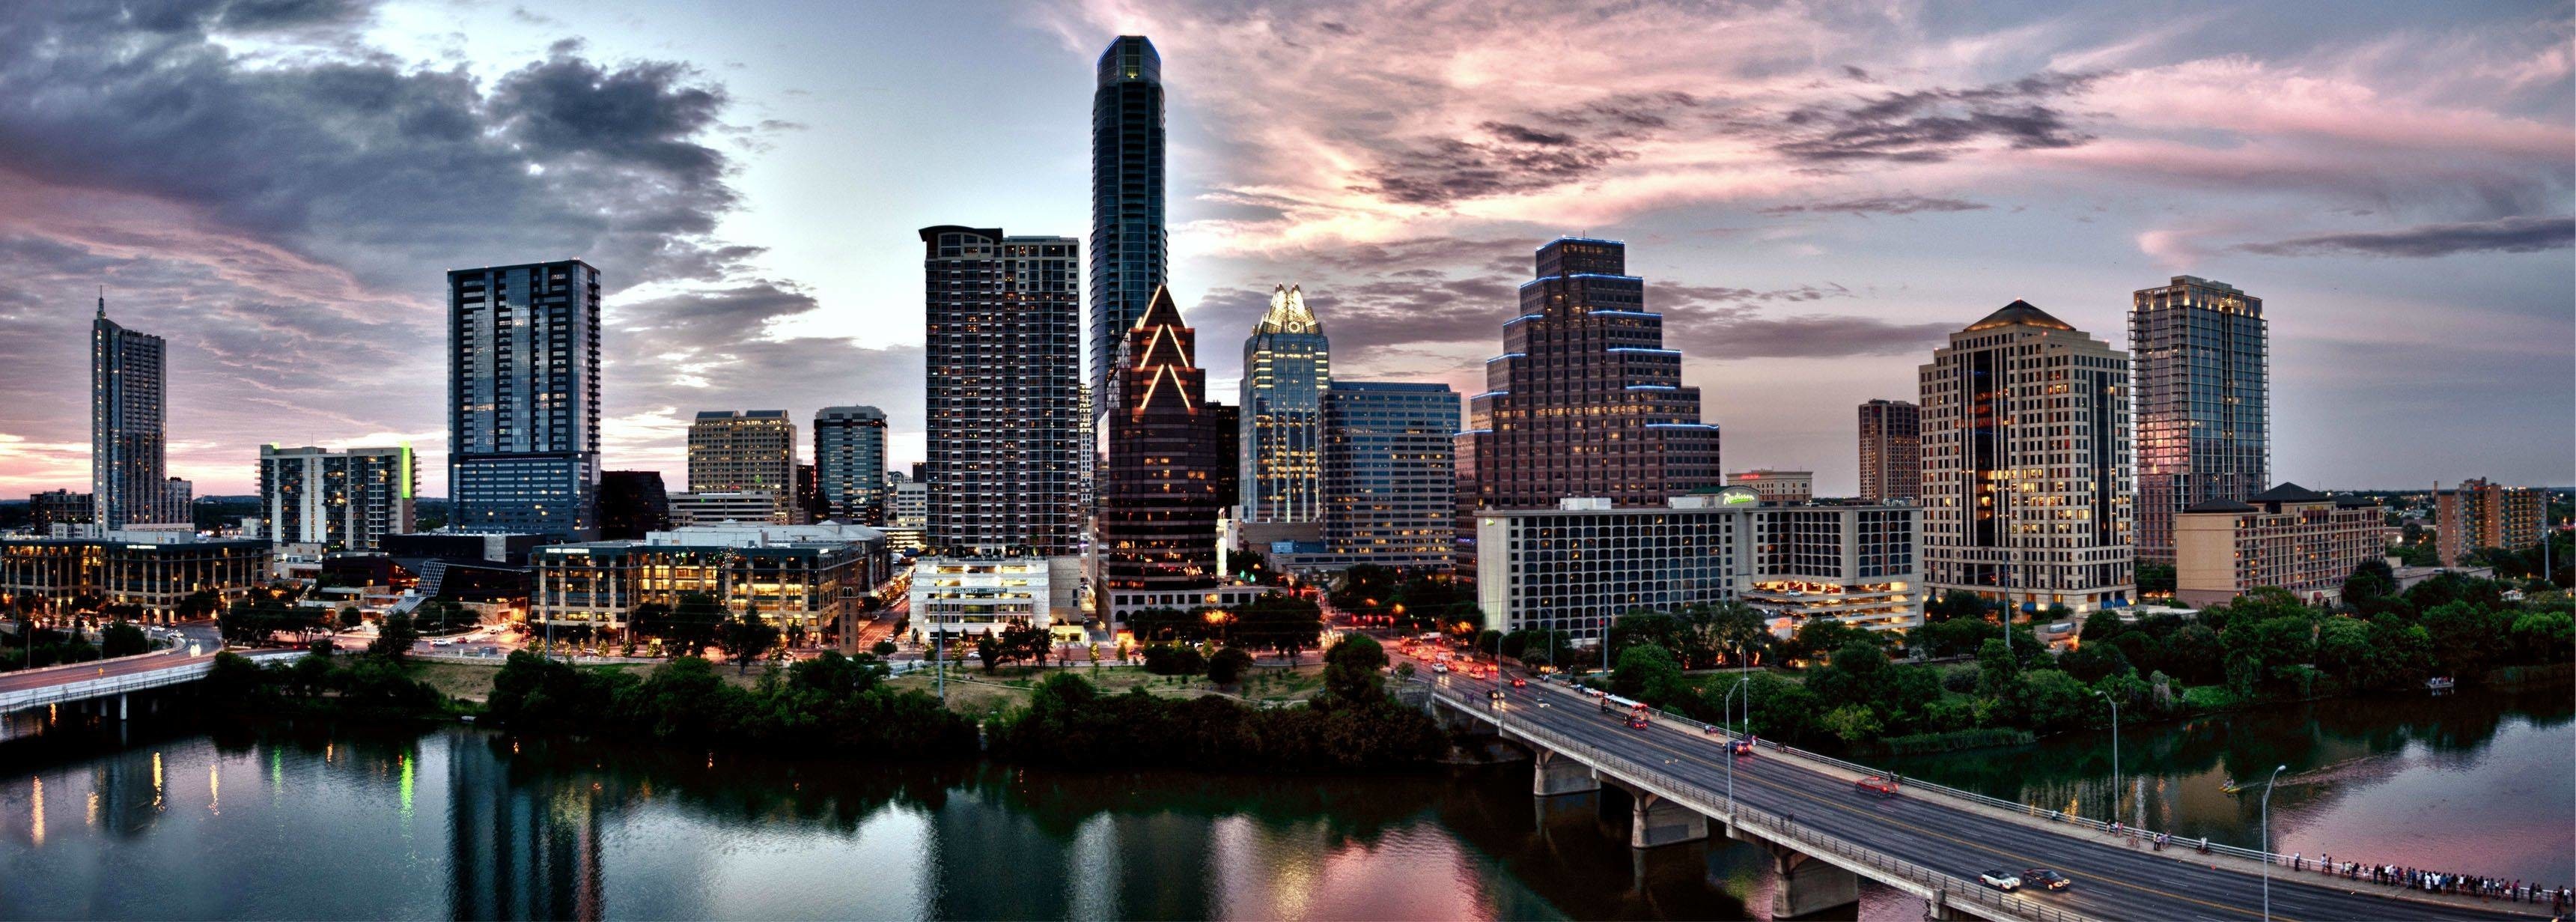 Austin: One of the fastest growing large cities in the United States since 2010. 3450x1240 Dual Screen Wallpaper.